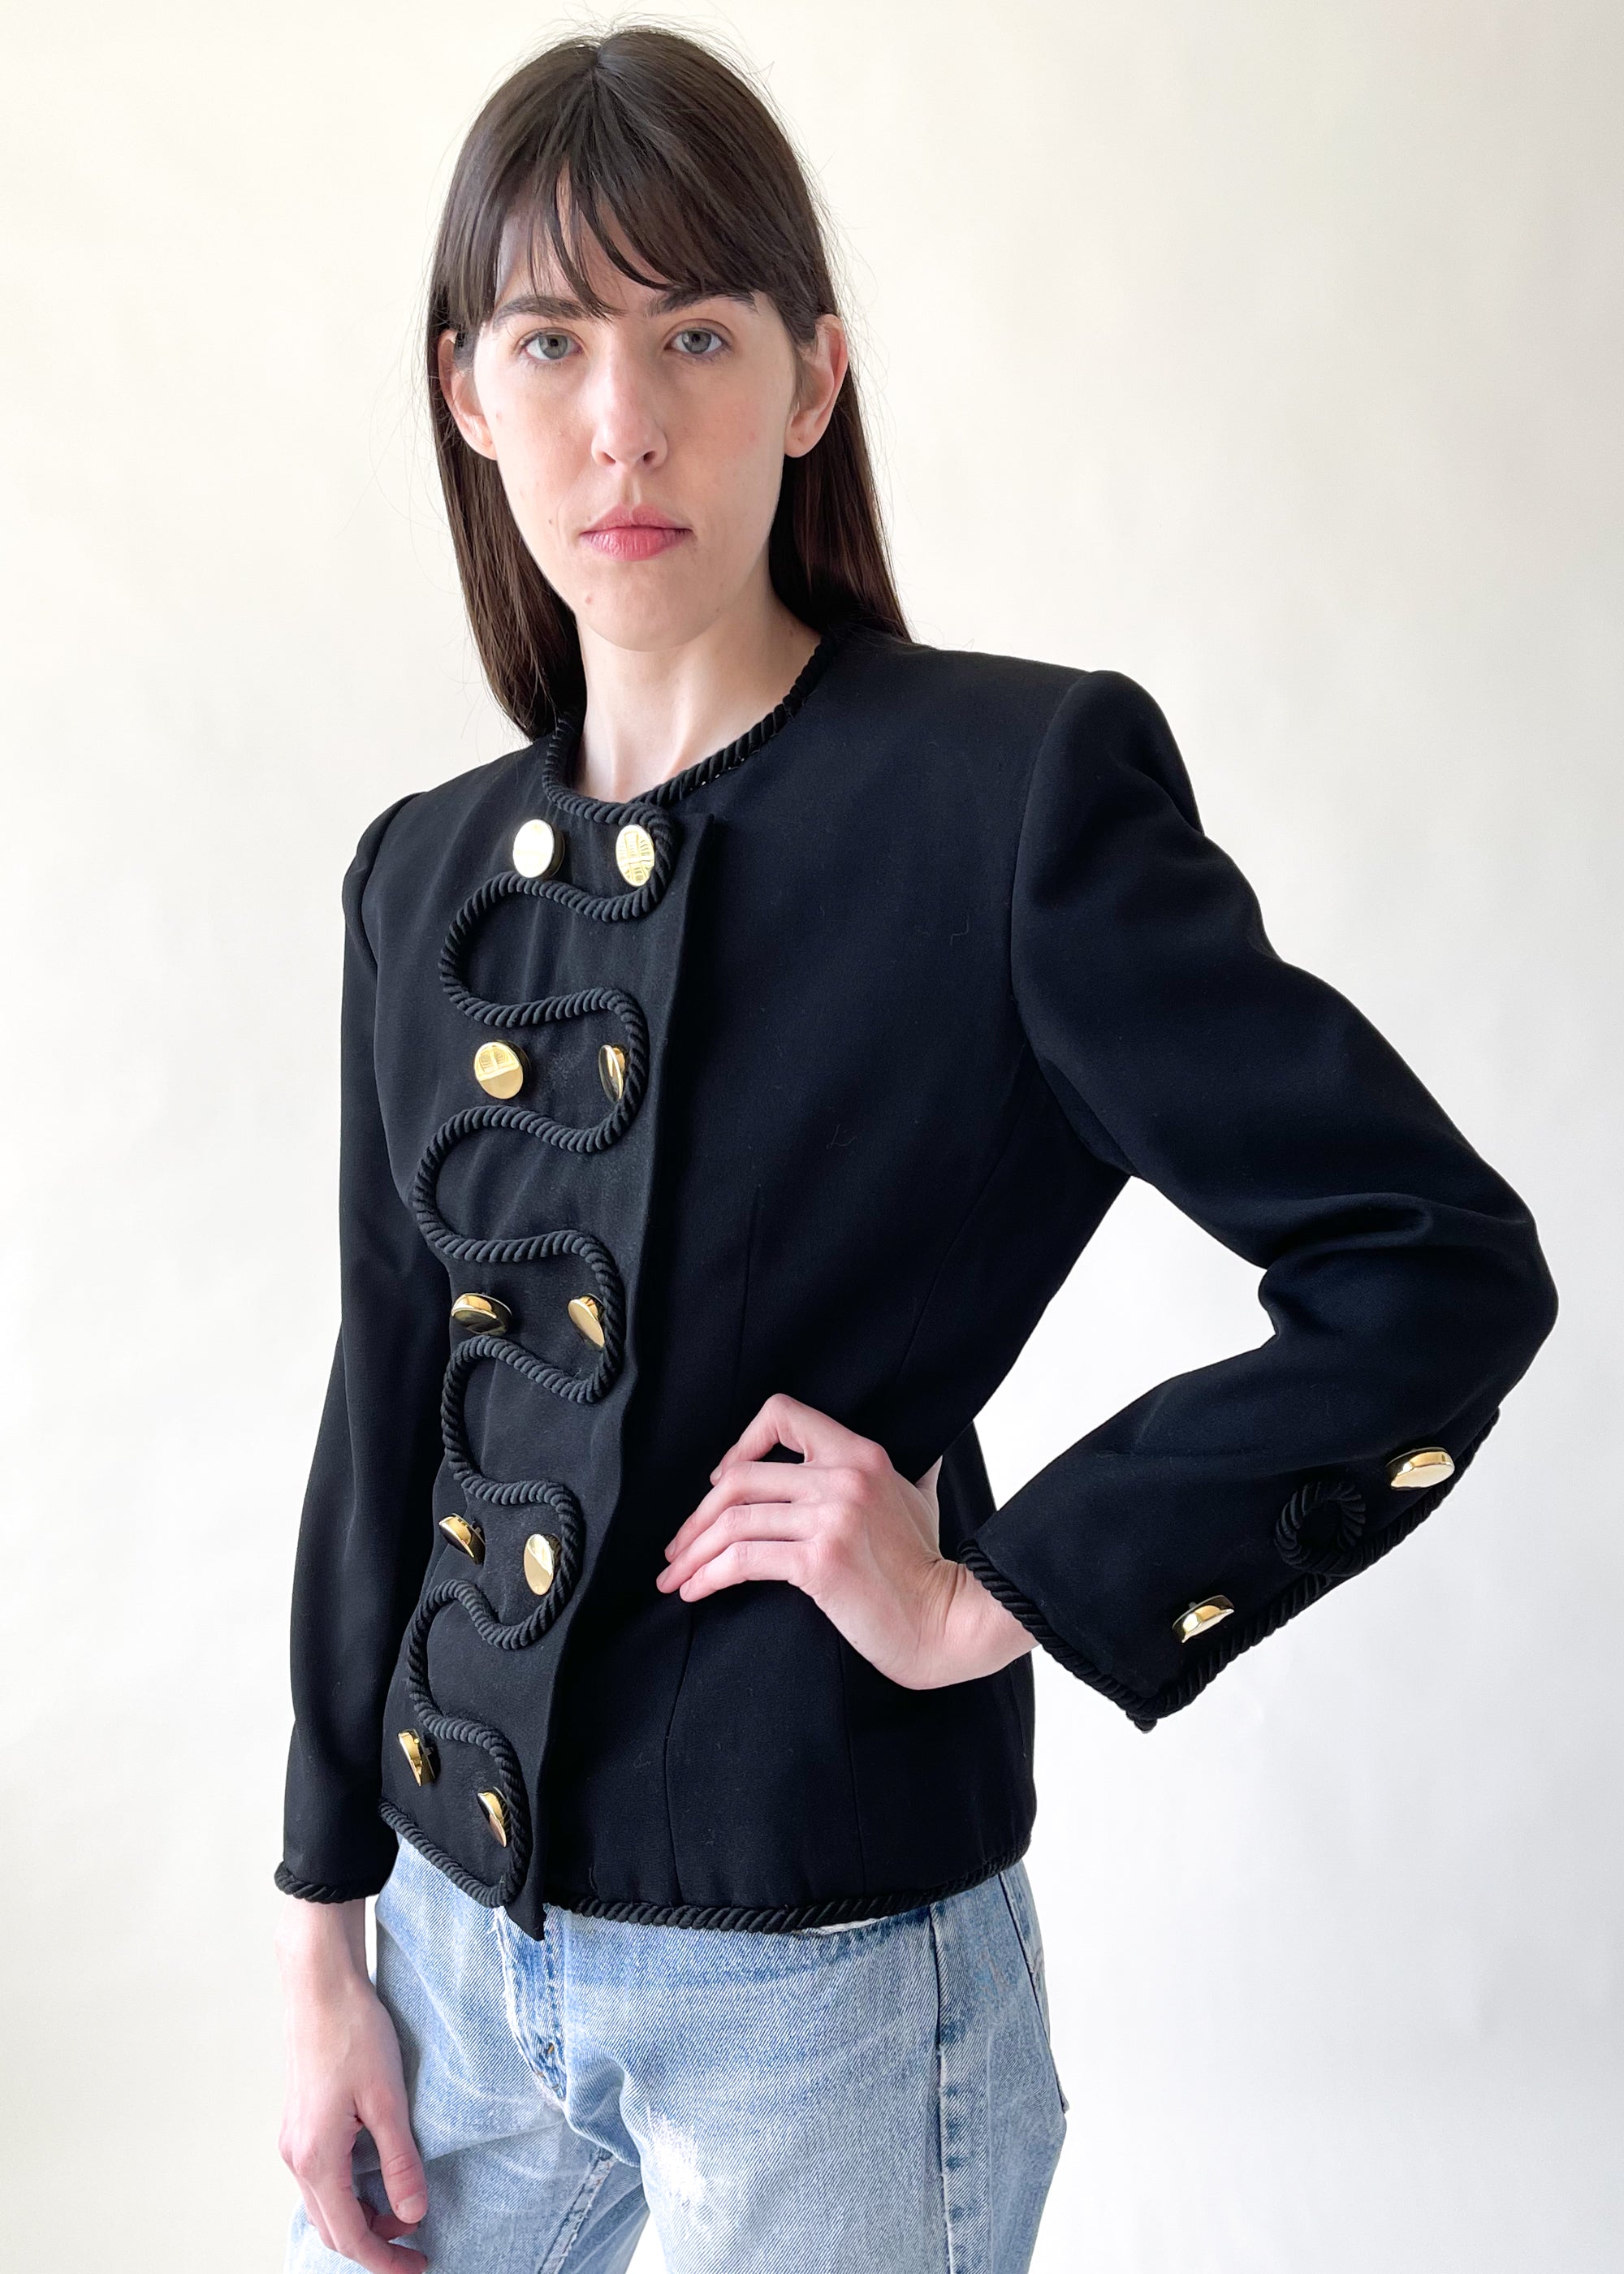 Vintage 1980s Givenchy Blazer with Soutache - Raleigh Vintage